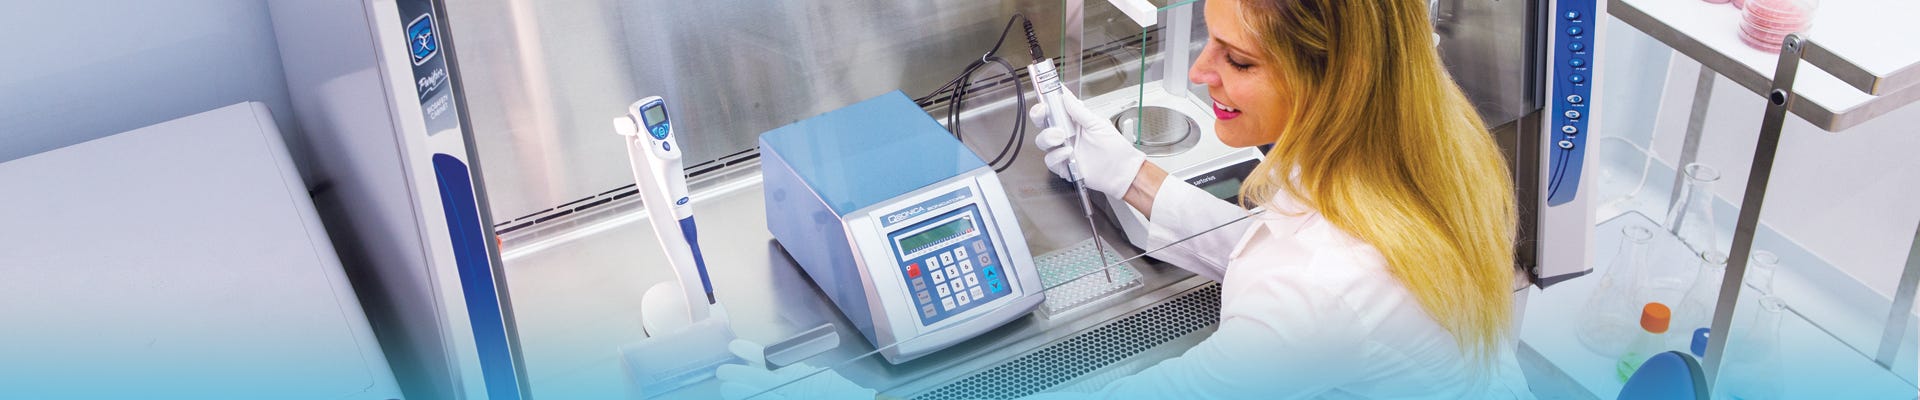 Handheld and Benchtop Homogenizers, Sonicators and Cell Disruptors Designed for Cell Lysis and Tissue Grinding